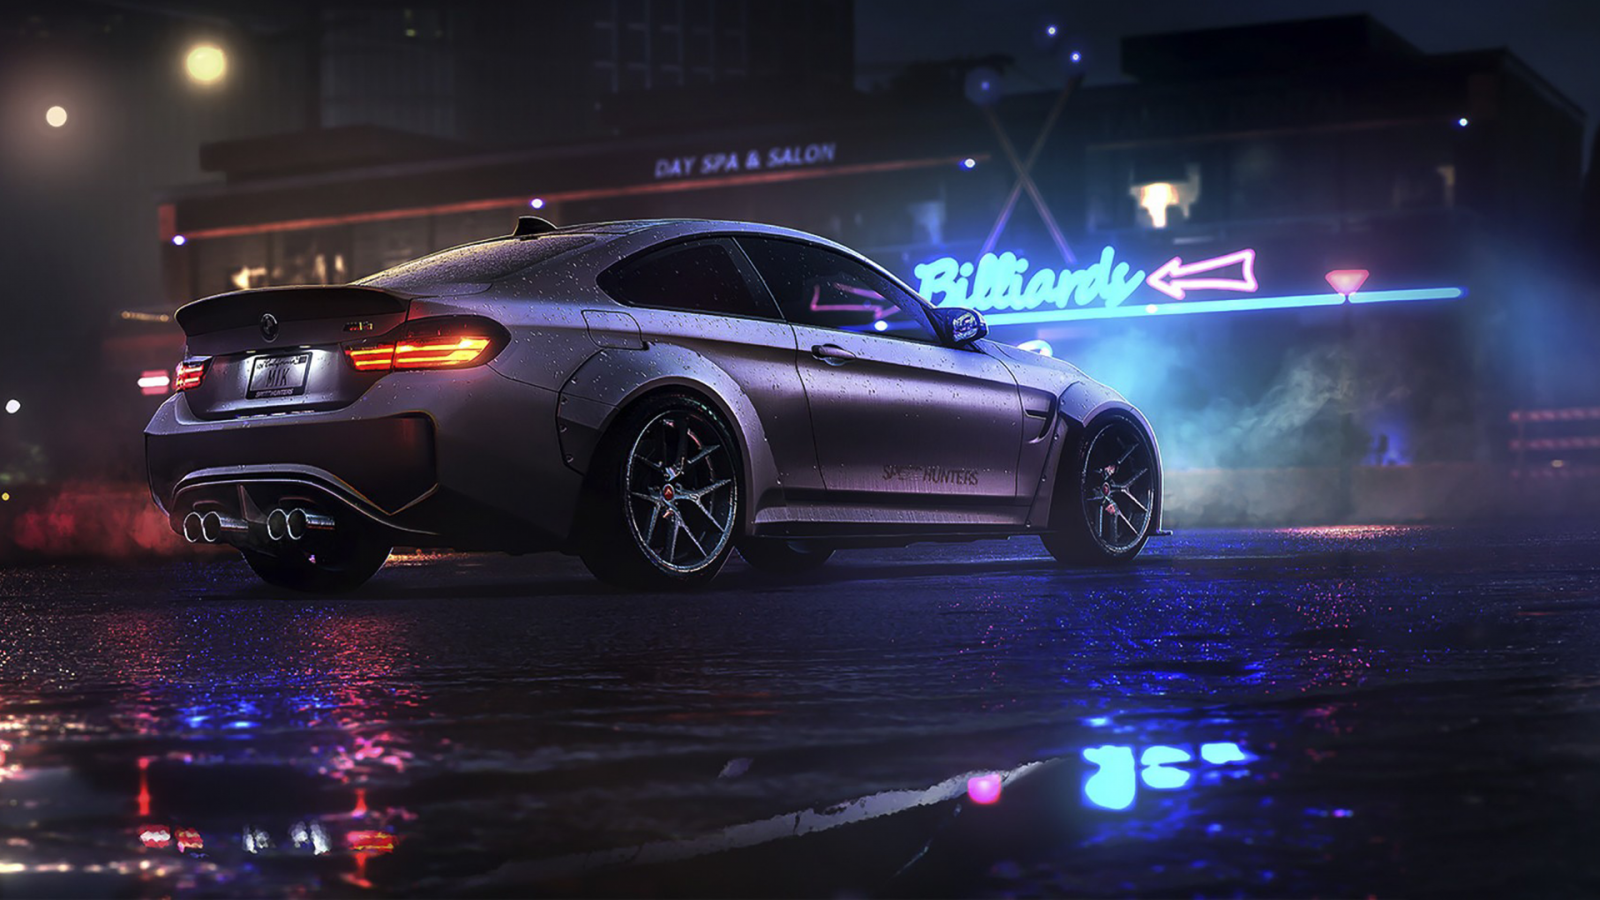 Download 1600x900 Bmw, Side View, Water Drops, Night, Sport, Cars Wallpaper